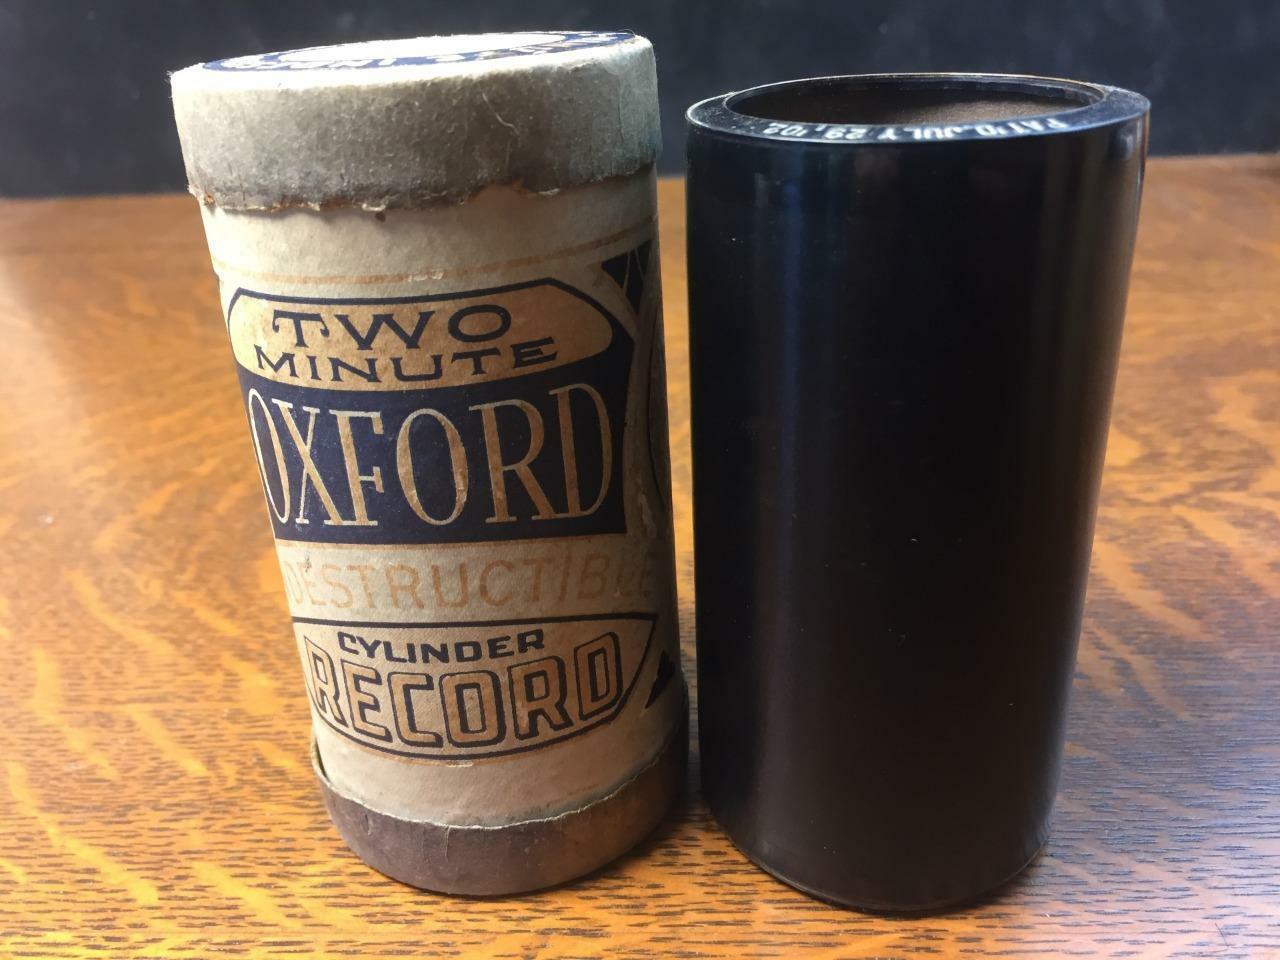 Oxford Two Minute Cylinder Record No. 1099 Hymn \